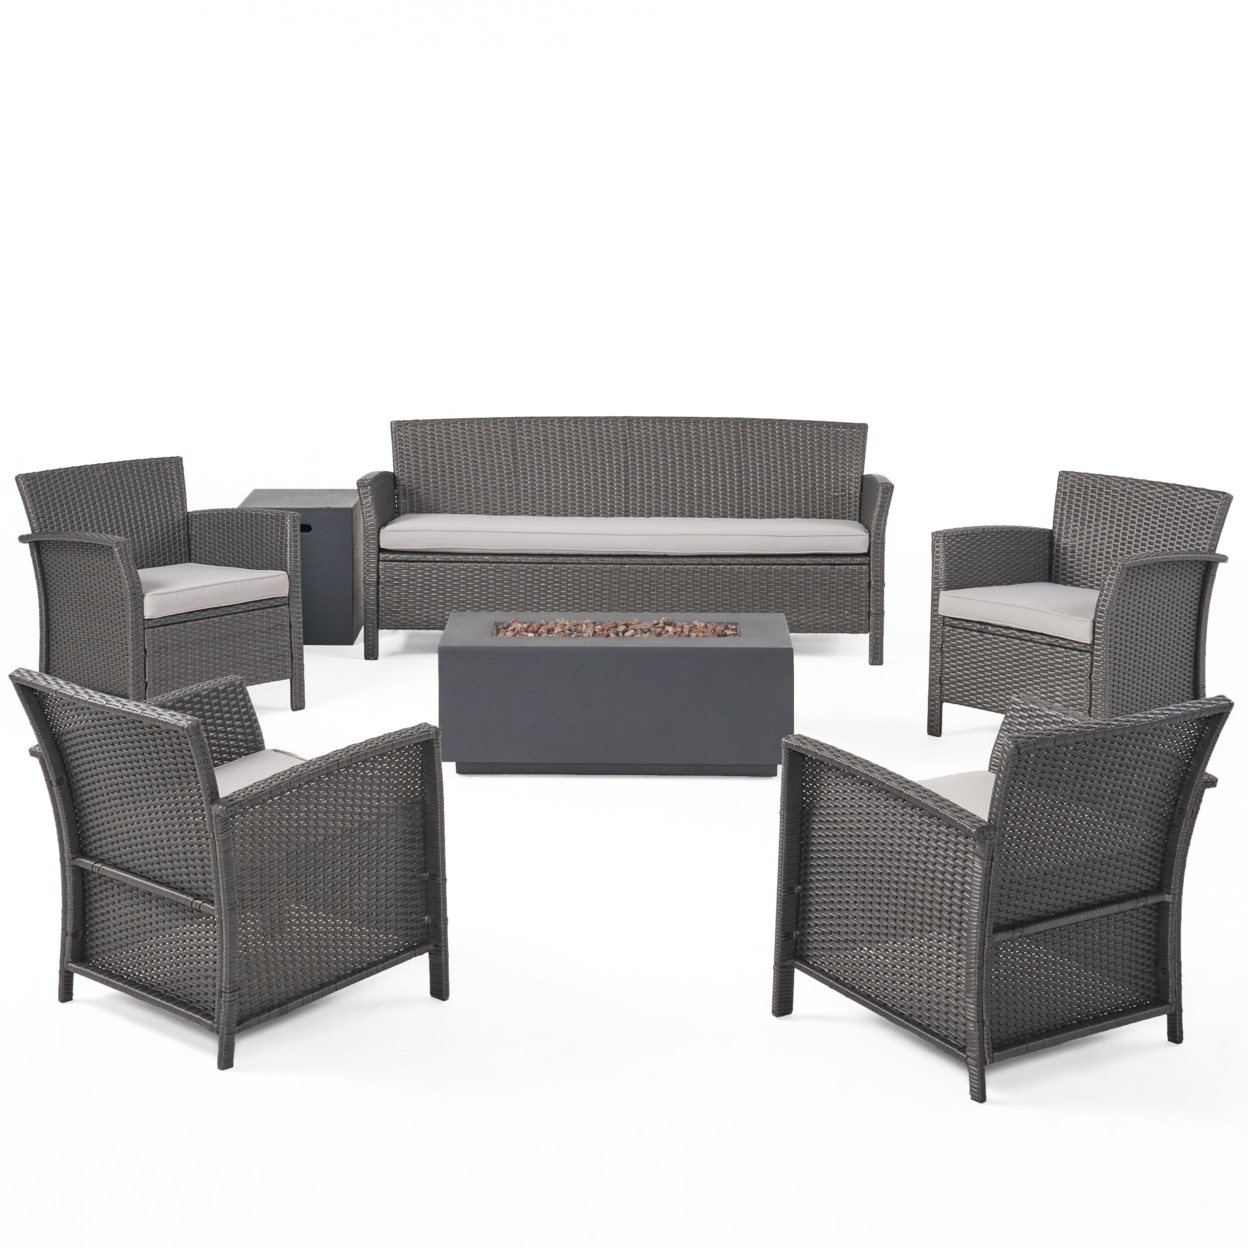 Mason Outdoor 7 Seater Wicker Chat Set With Fire Pit, Gray And Dark Gray